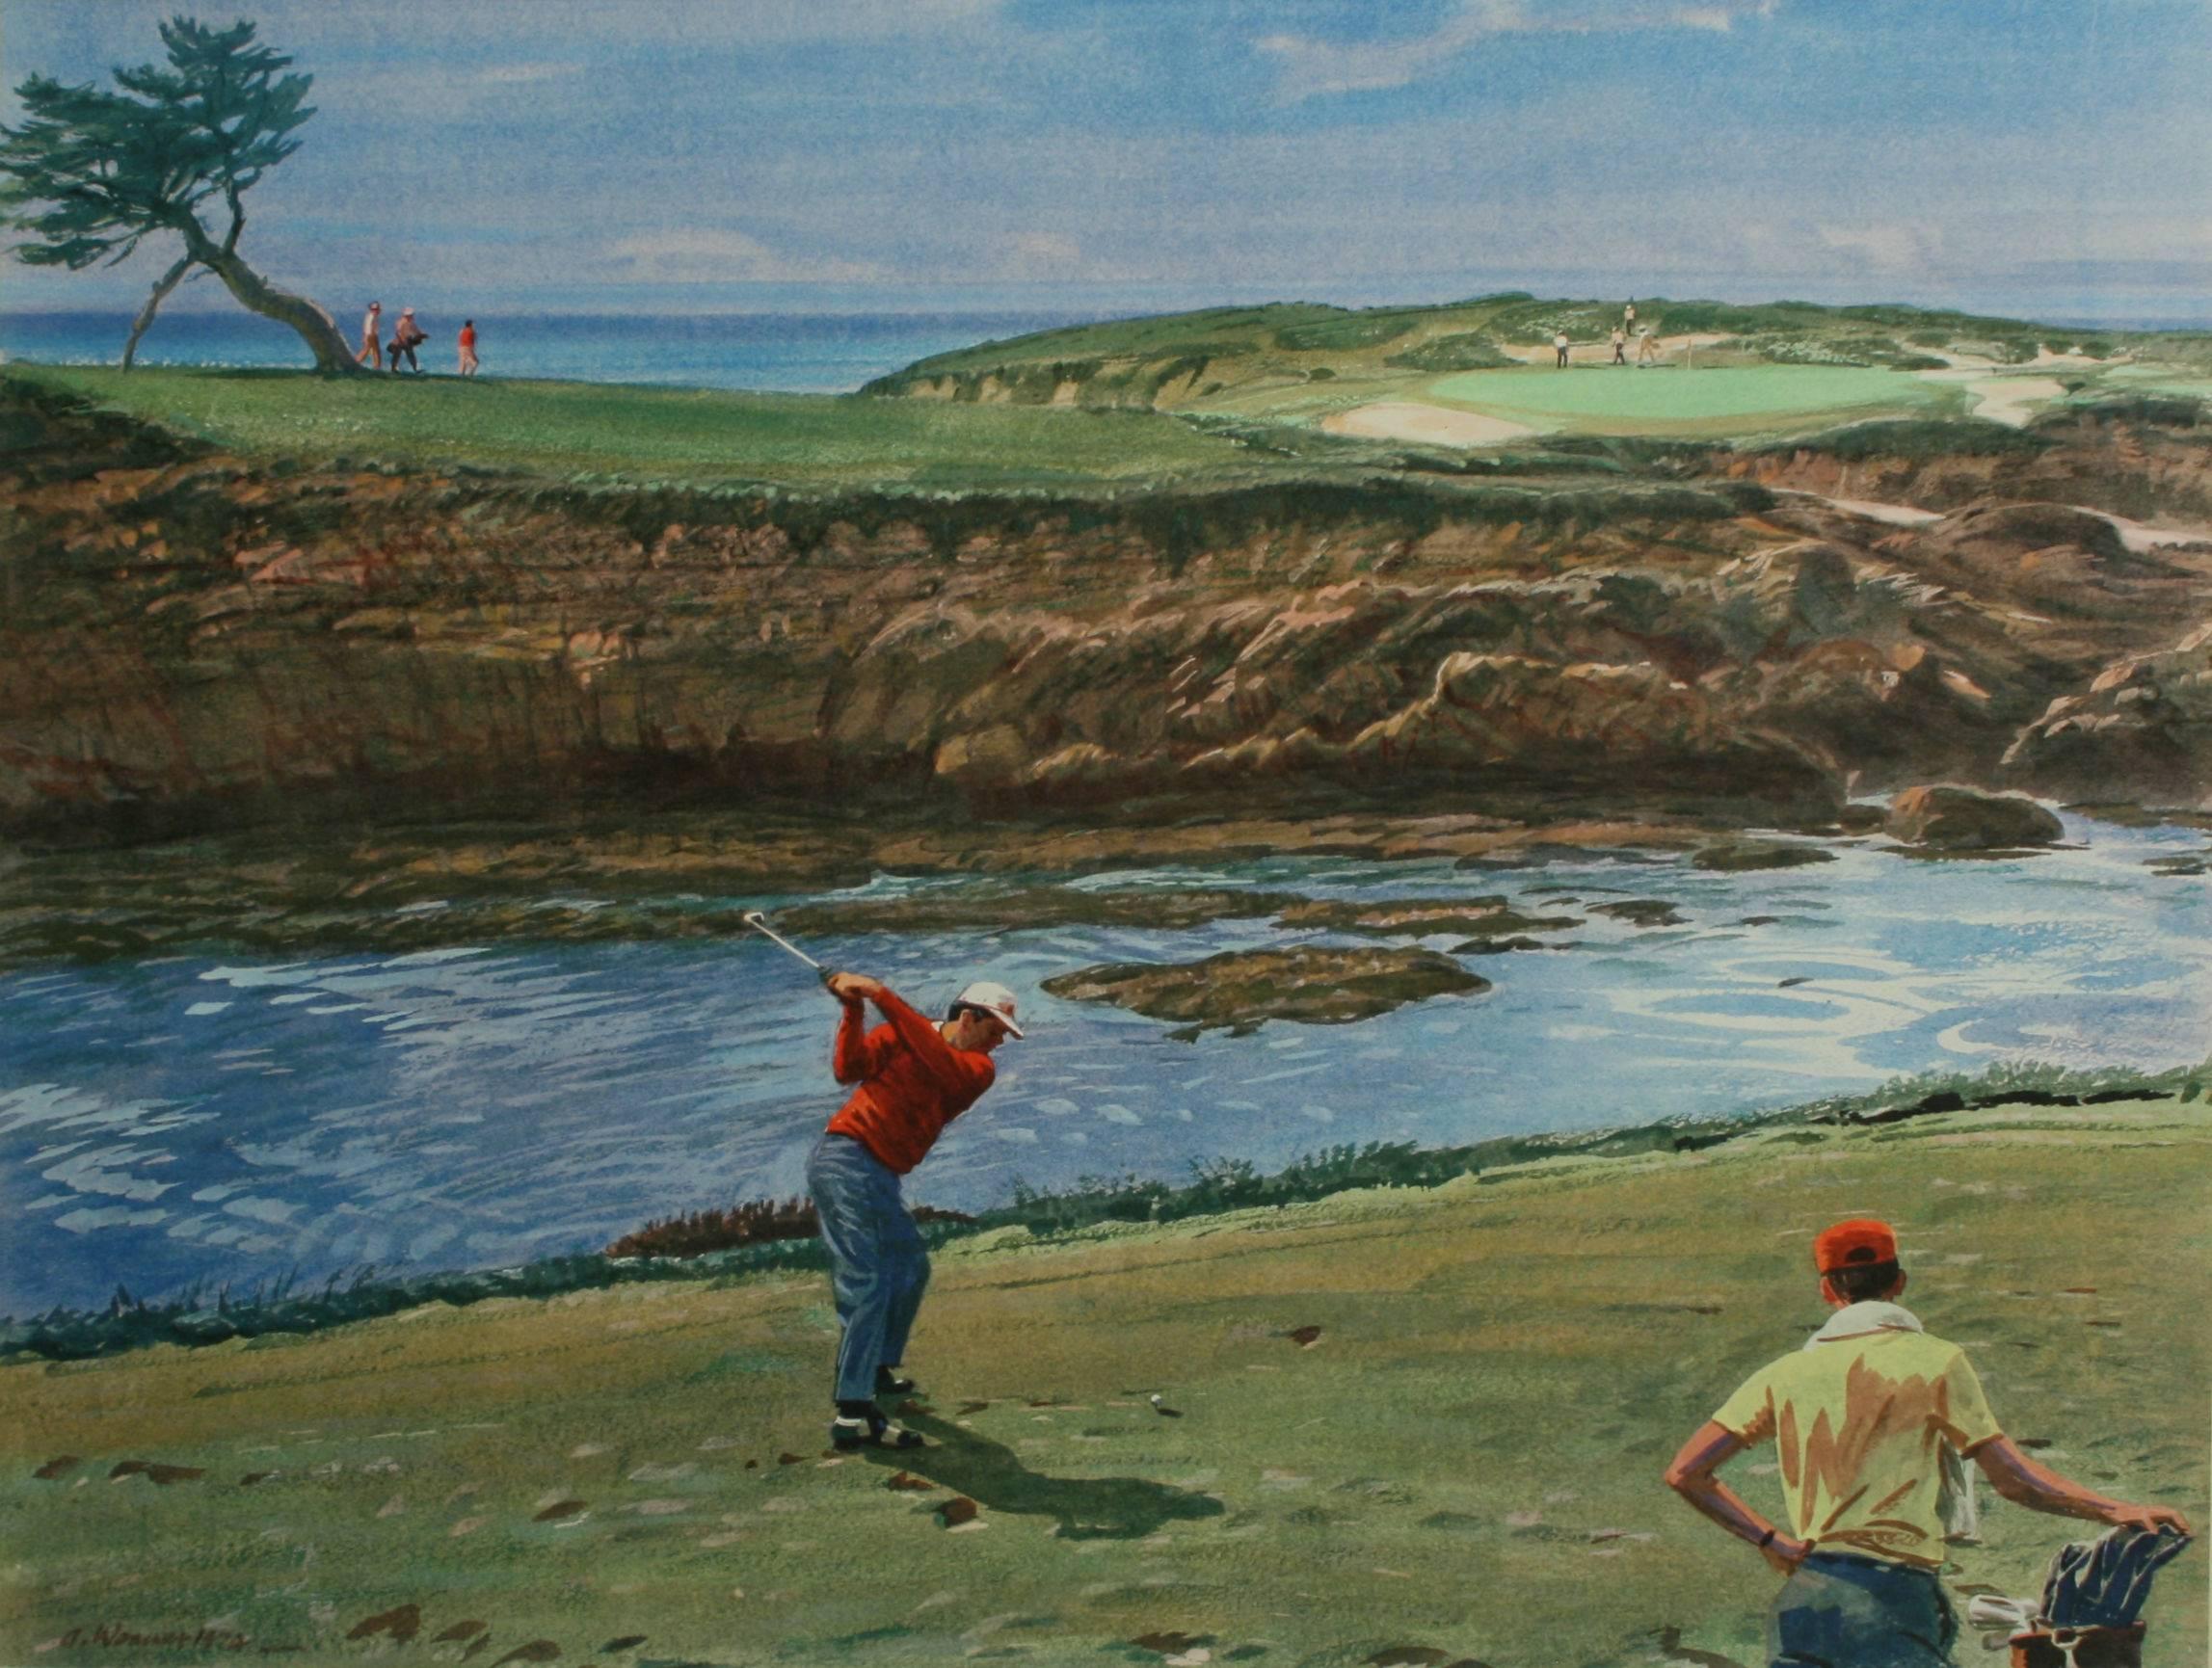 Arthur Weaver golf print, Cypress Point. 
A good large golfing photolithograph taken from the original painting by Arthur Weaver; Cypress Point, view from the 16th tee, Lee Trevino drives. 
Signed in pencil by the artist with hand drawn pencil